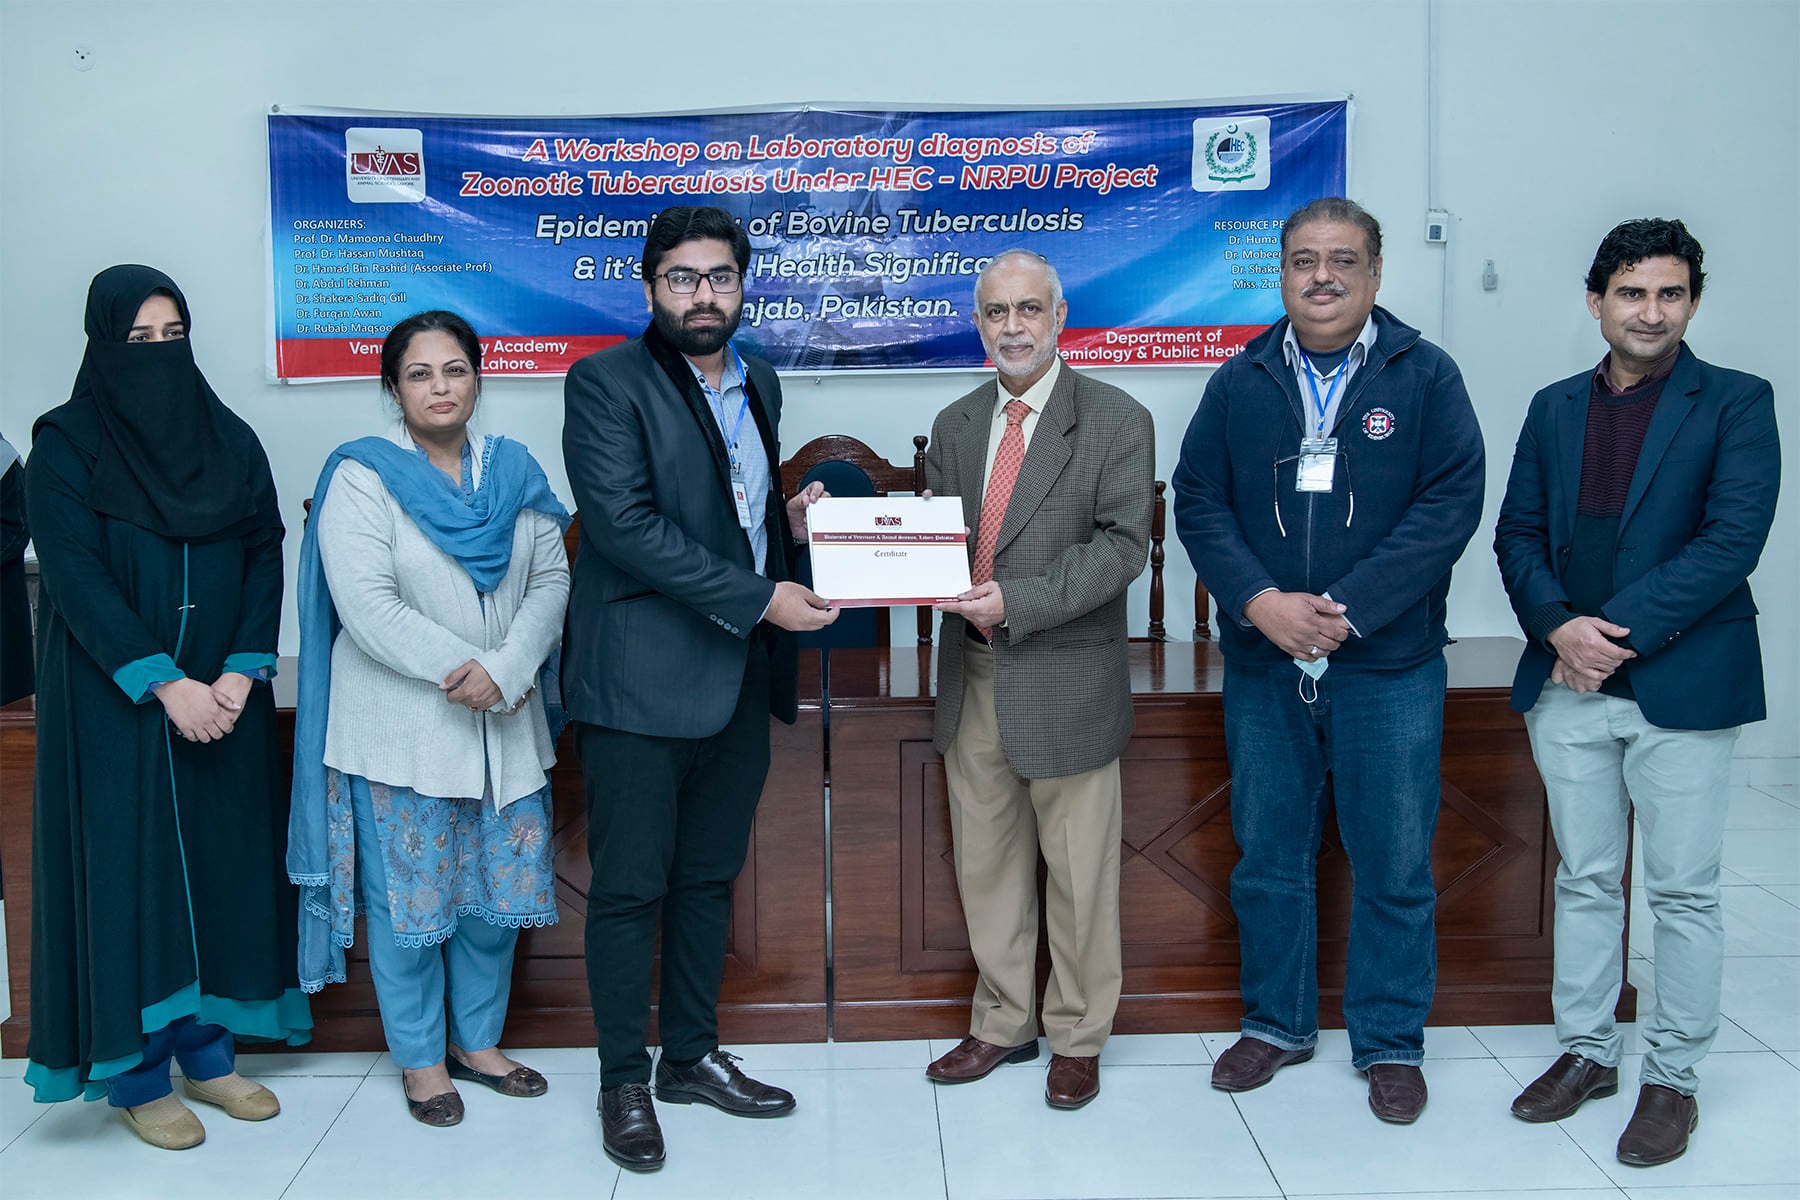 2-days workshop on ‘Different Laboratory Based Diagnostic Techniques for Bovine Tuberculosis’ concludes at UVAS